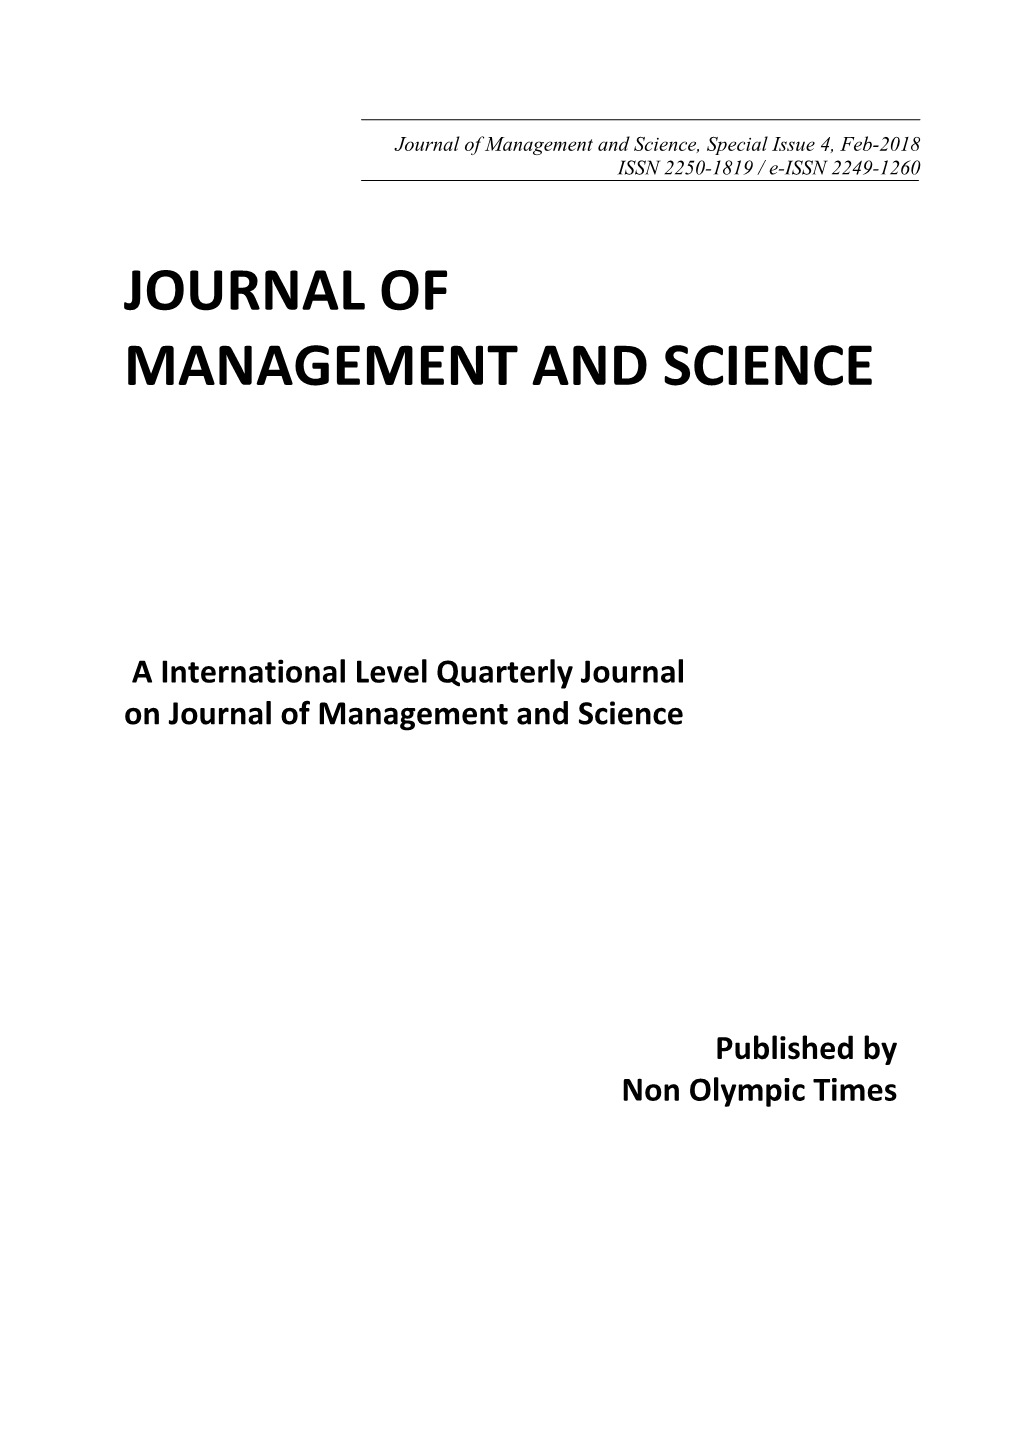 Journal of Management and Science, Special Issue 4, Feb-2018 ISSN 2250-1819 / E-ISSN 2249-1260